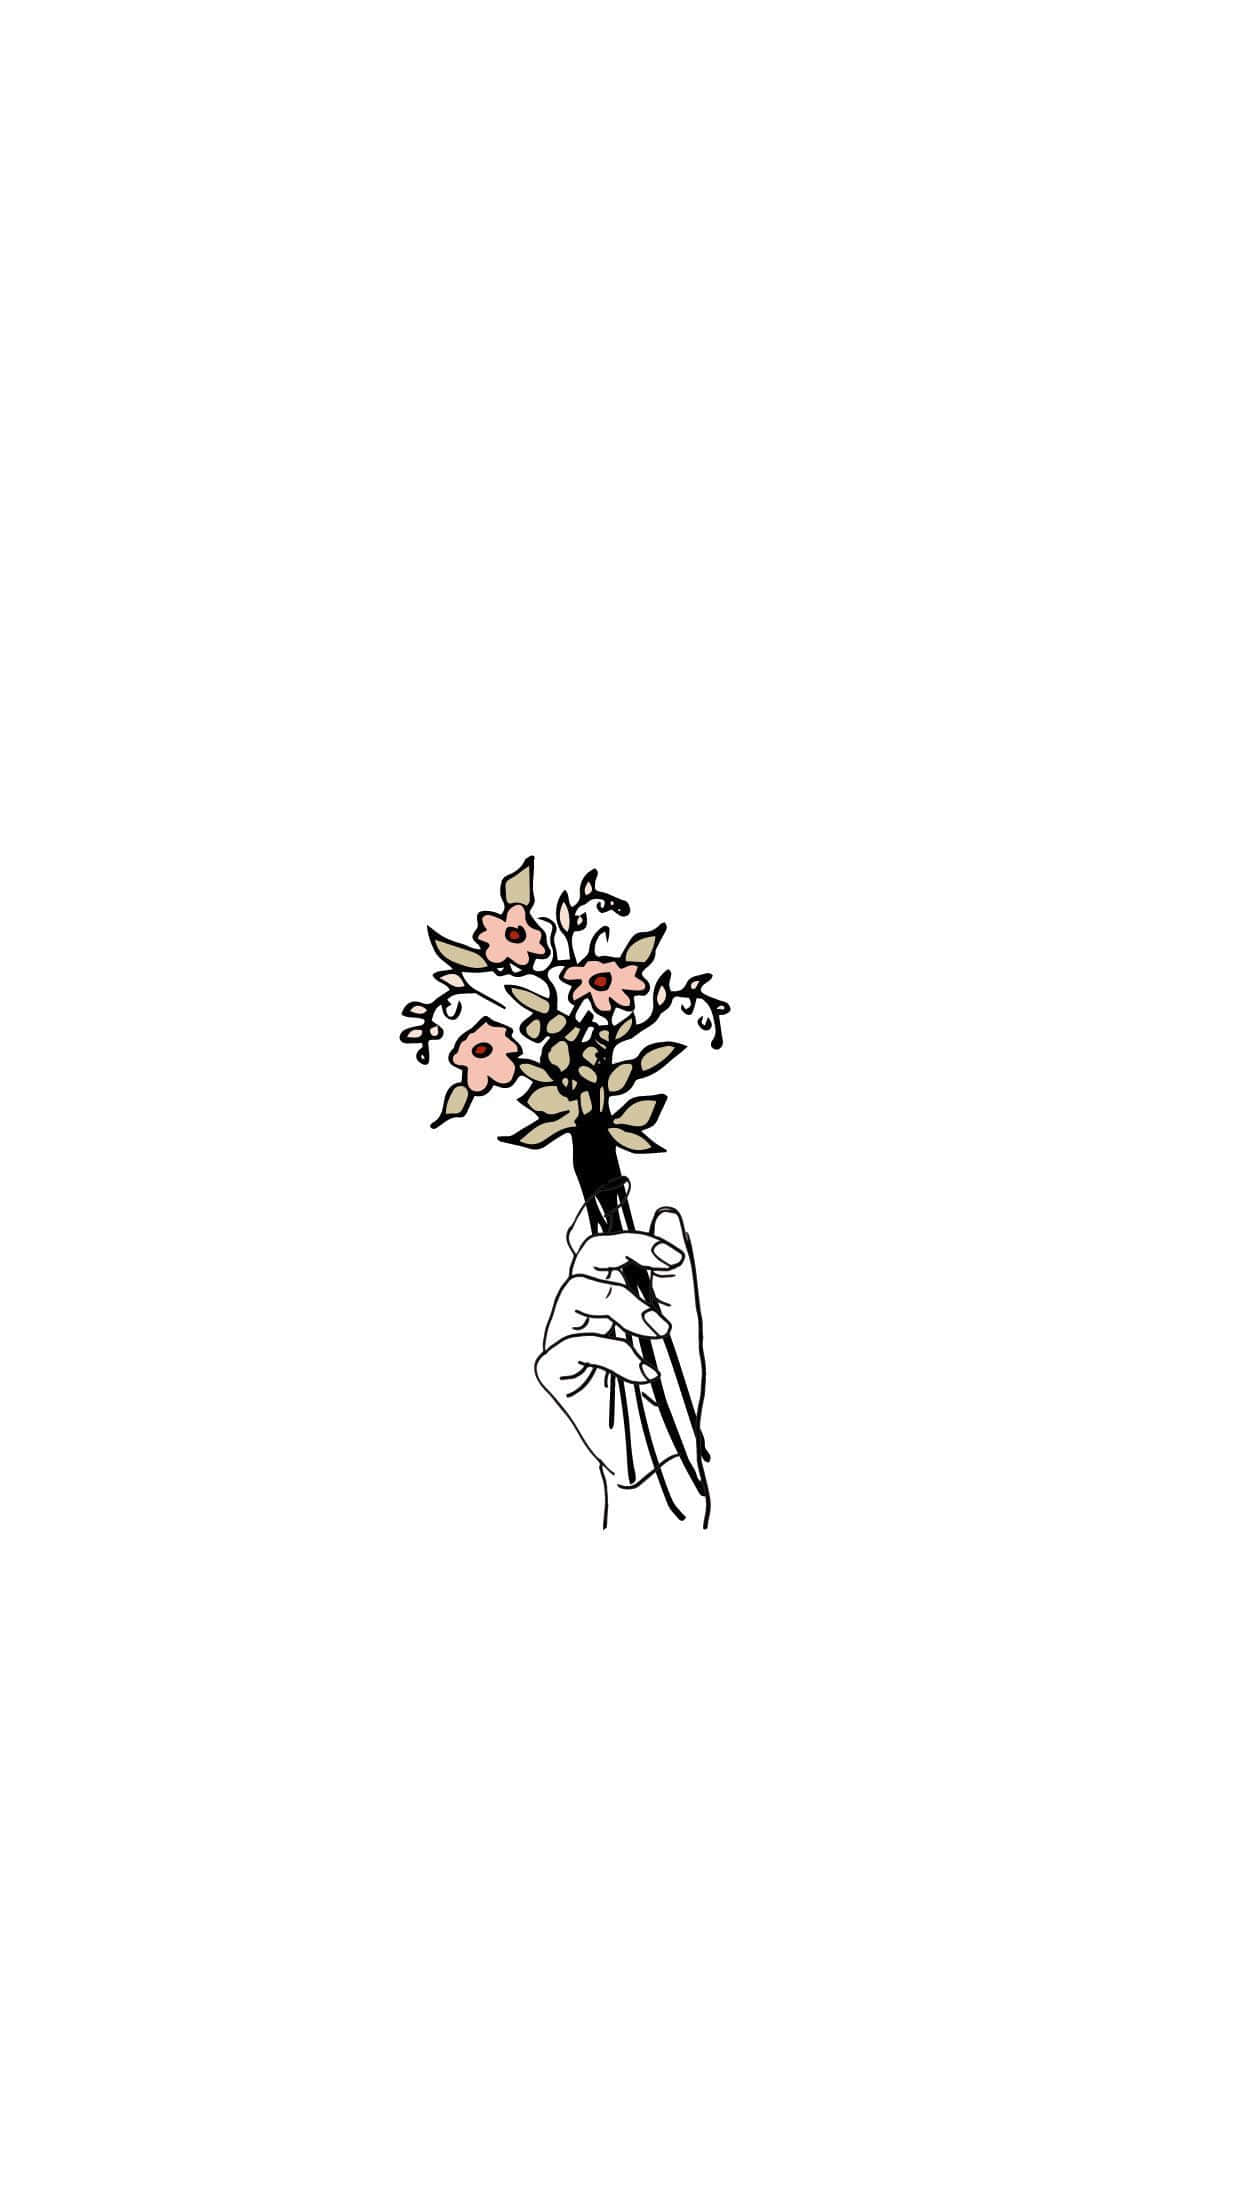 A Hand Holding A Bouquet Of Flowers